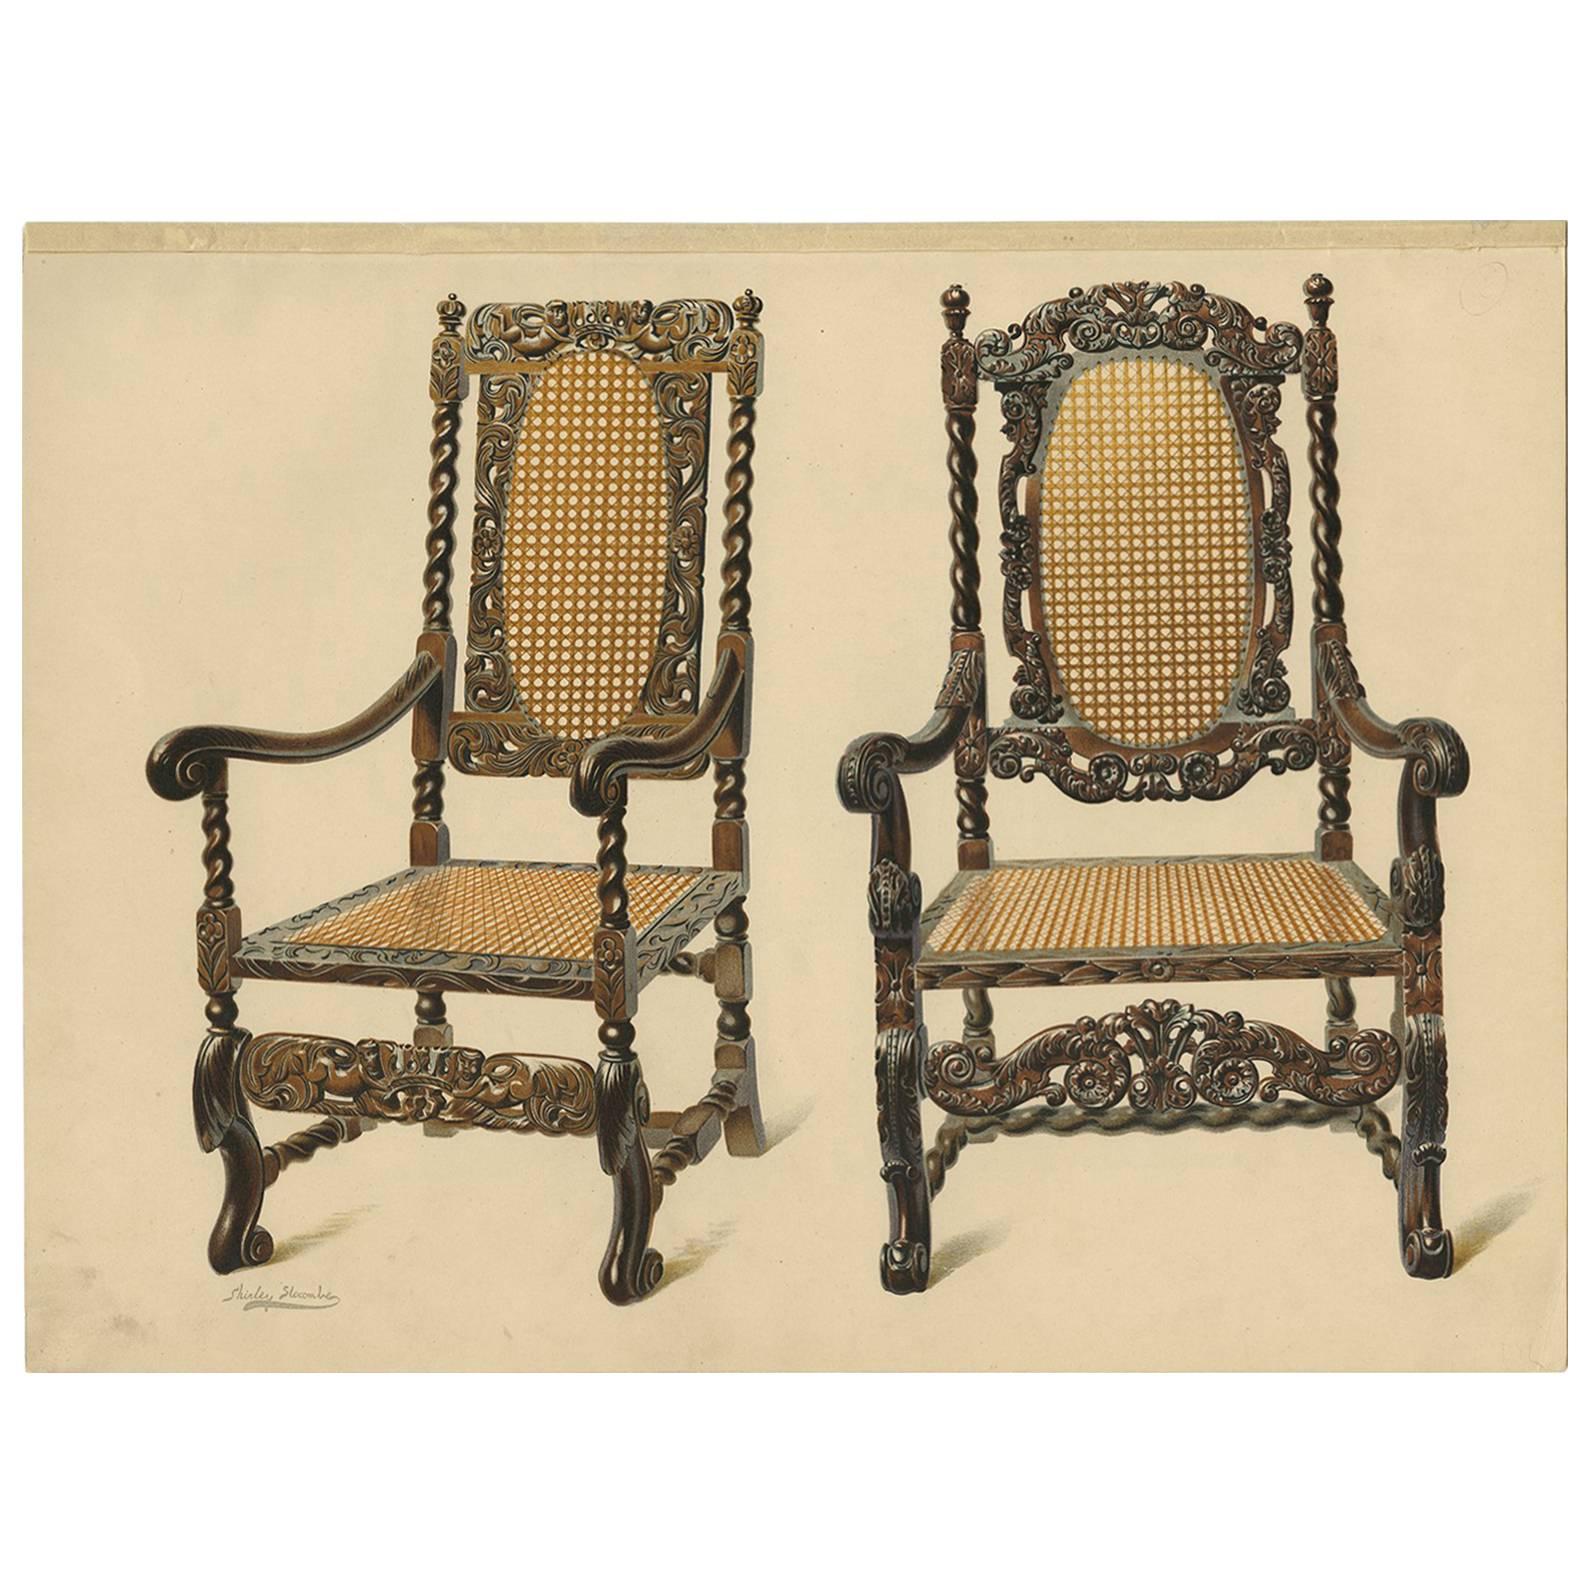 Antique Print of English Furniture 'Two Chairs' by P. Macquoid, 1906 For Sale